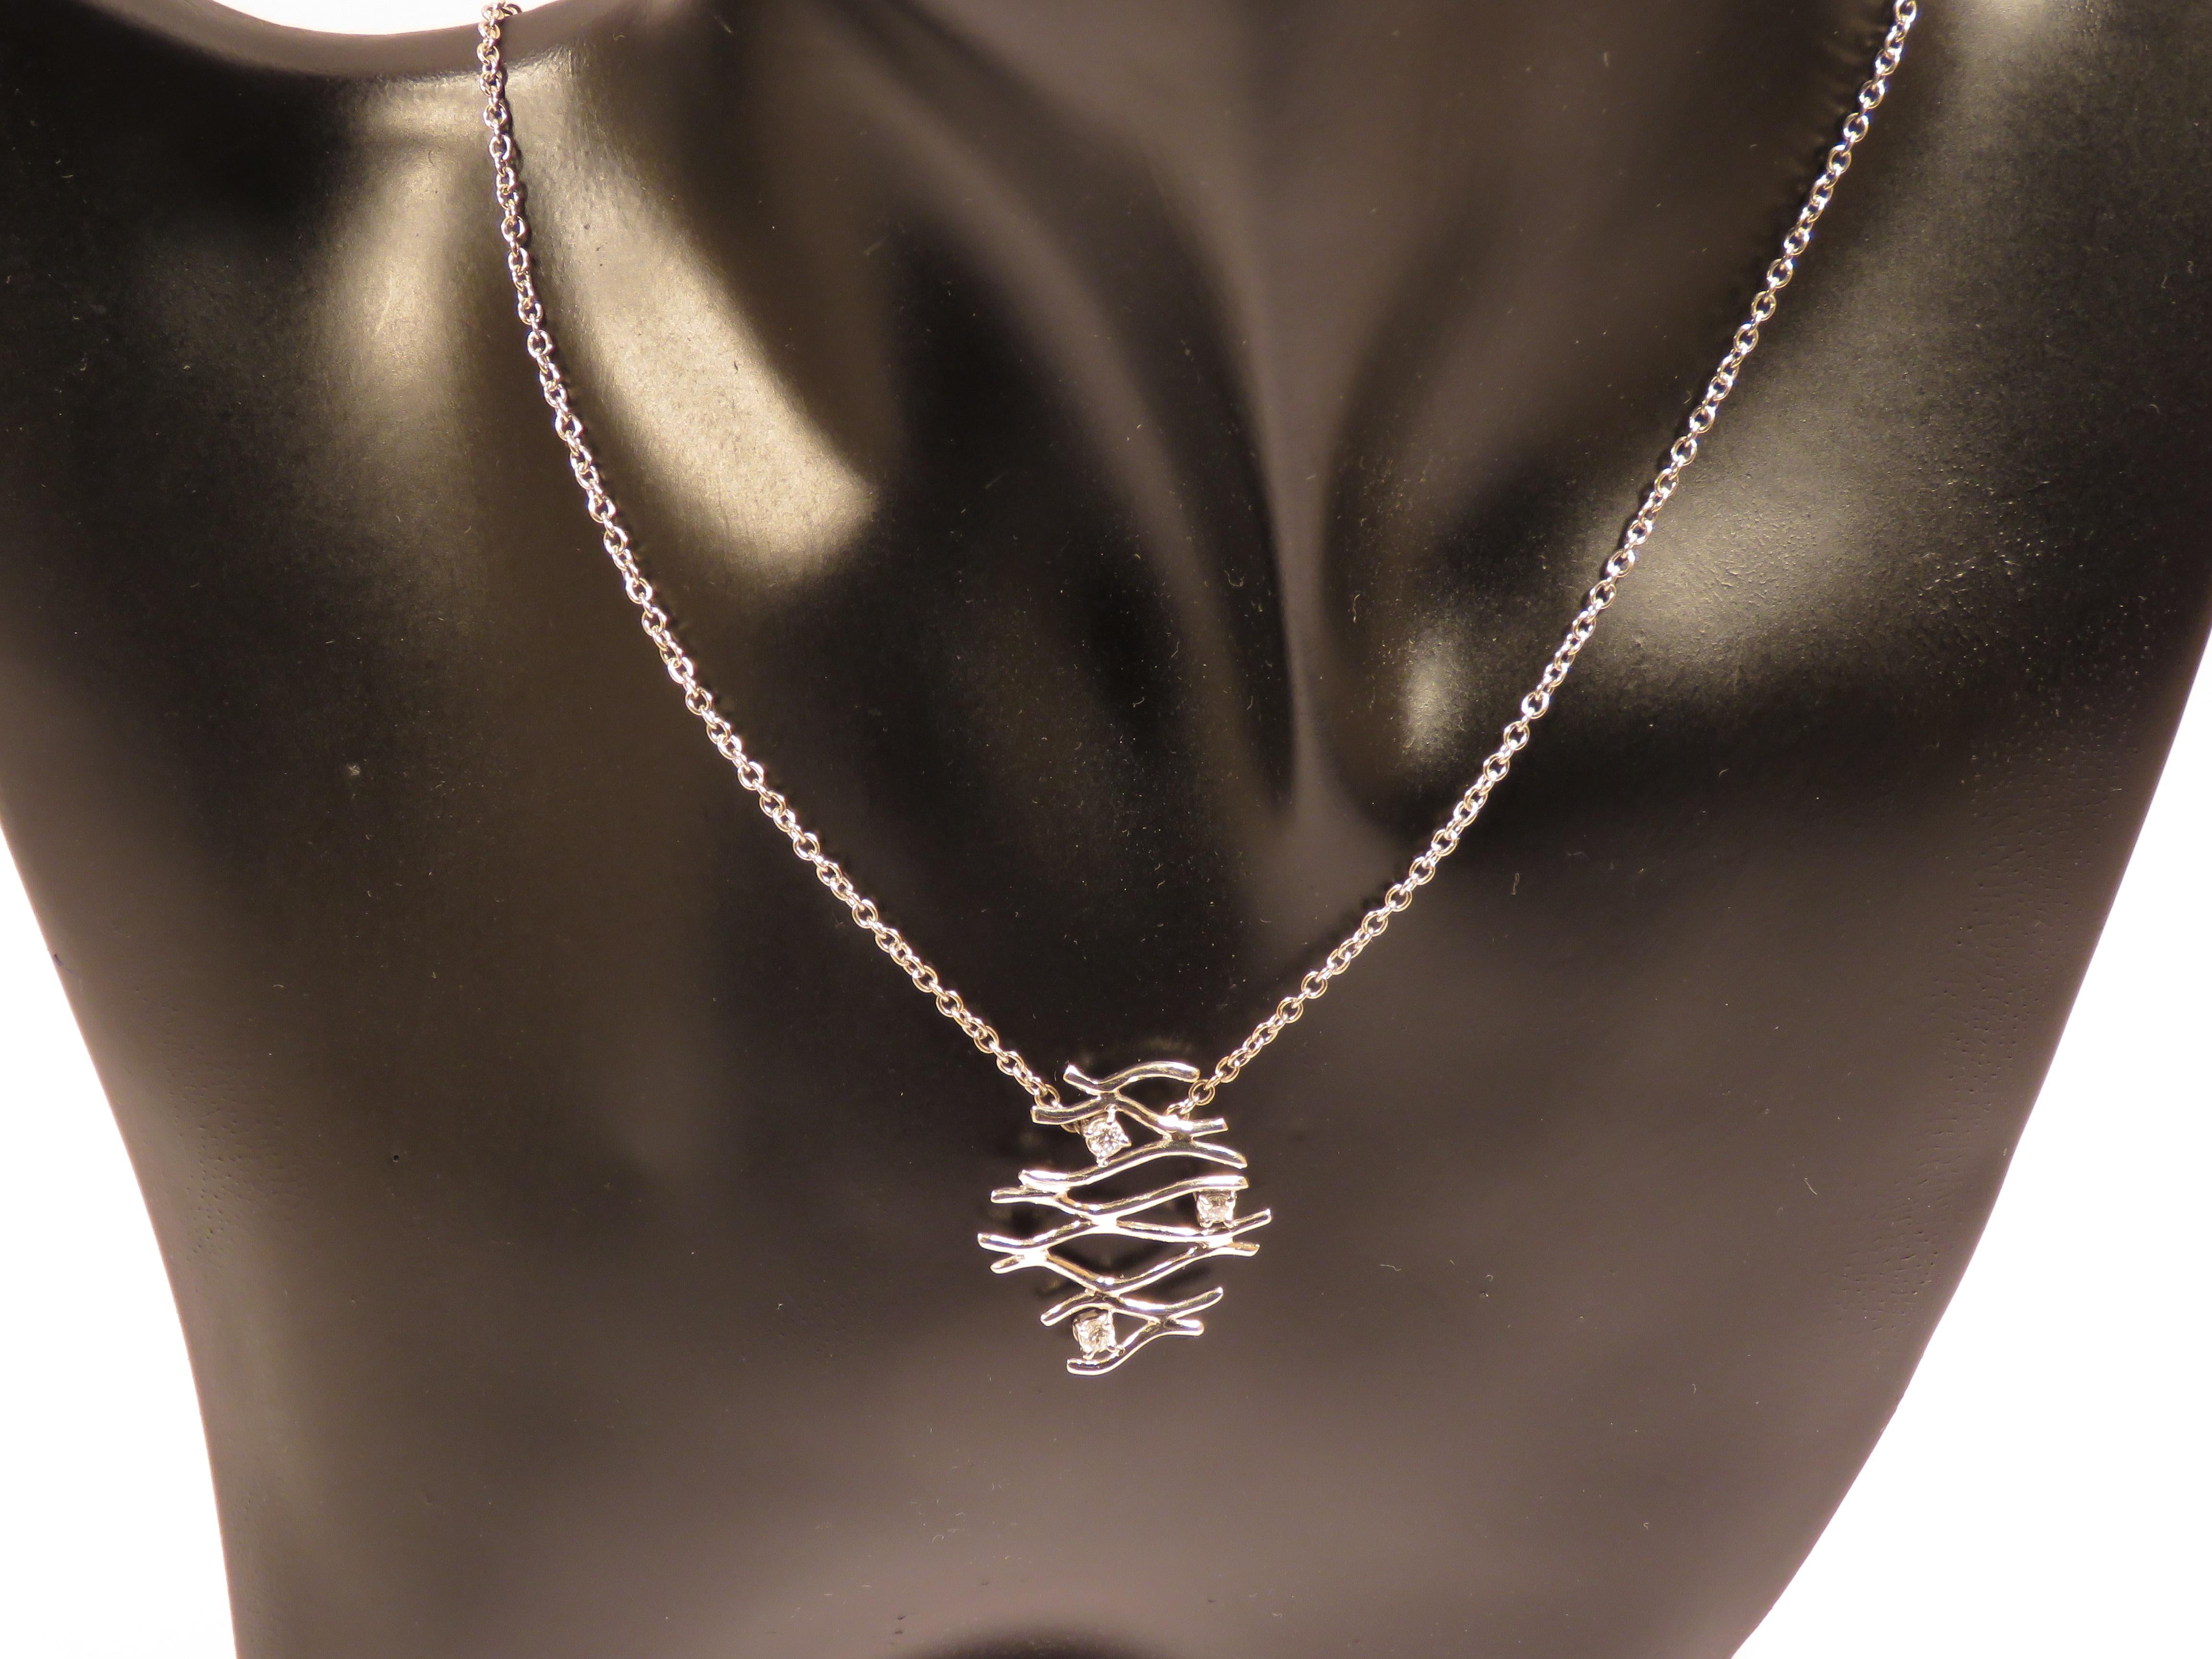 Contemporary Diamonds White Gold Necklace Handcrafted in Italy by Botta Gioielli